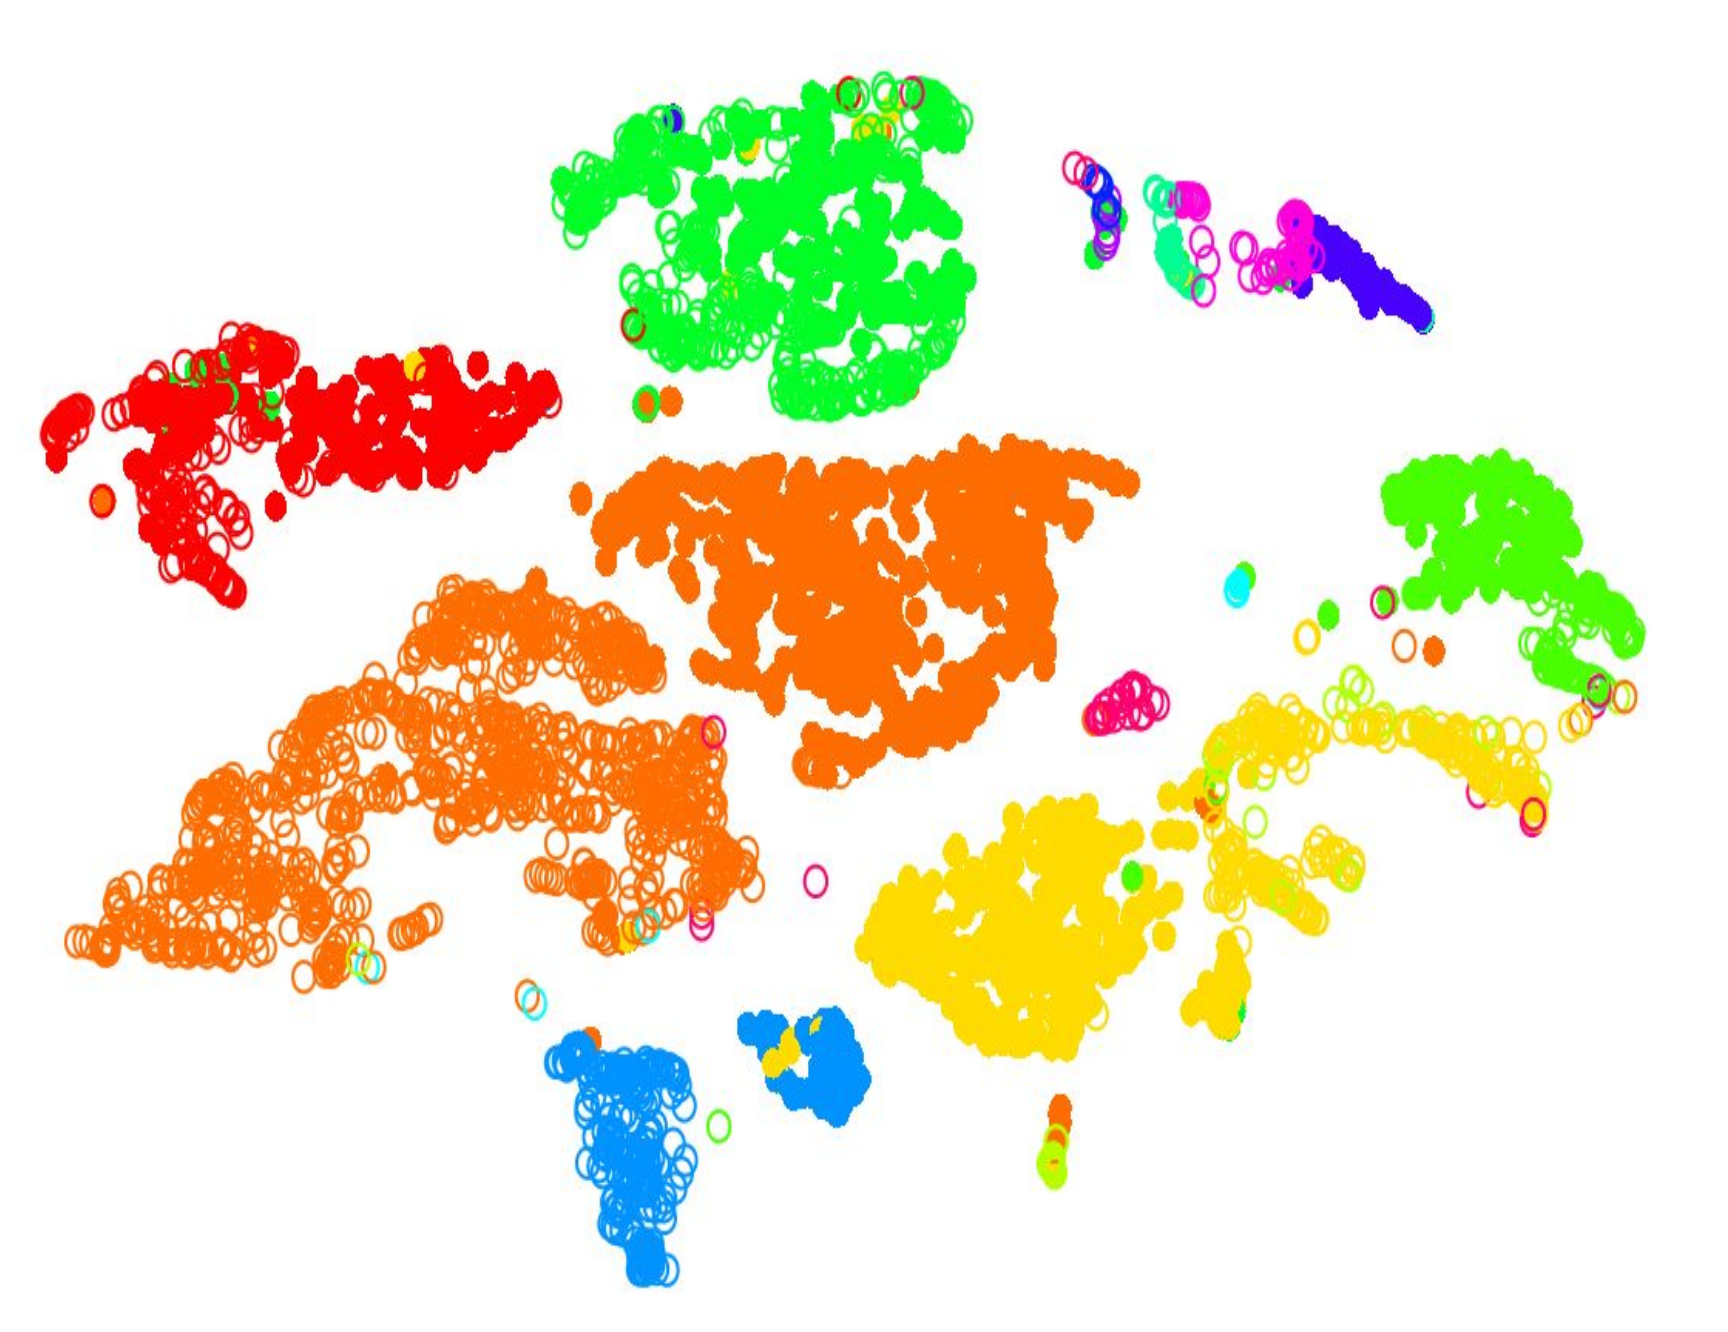 A scatter plot with many groups of cells labelled by different colours. The cells are largely clustered well, with few outlying cells.